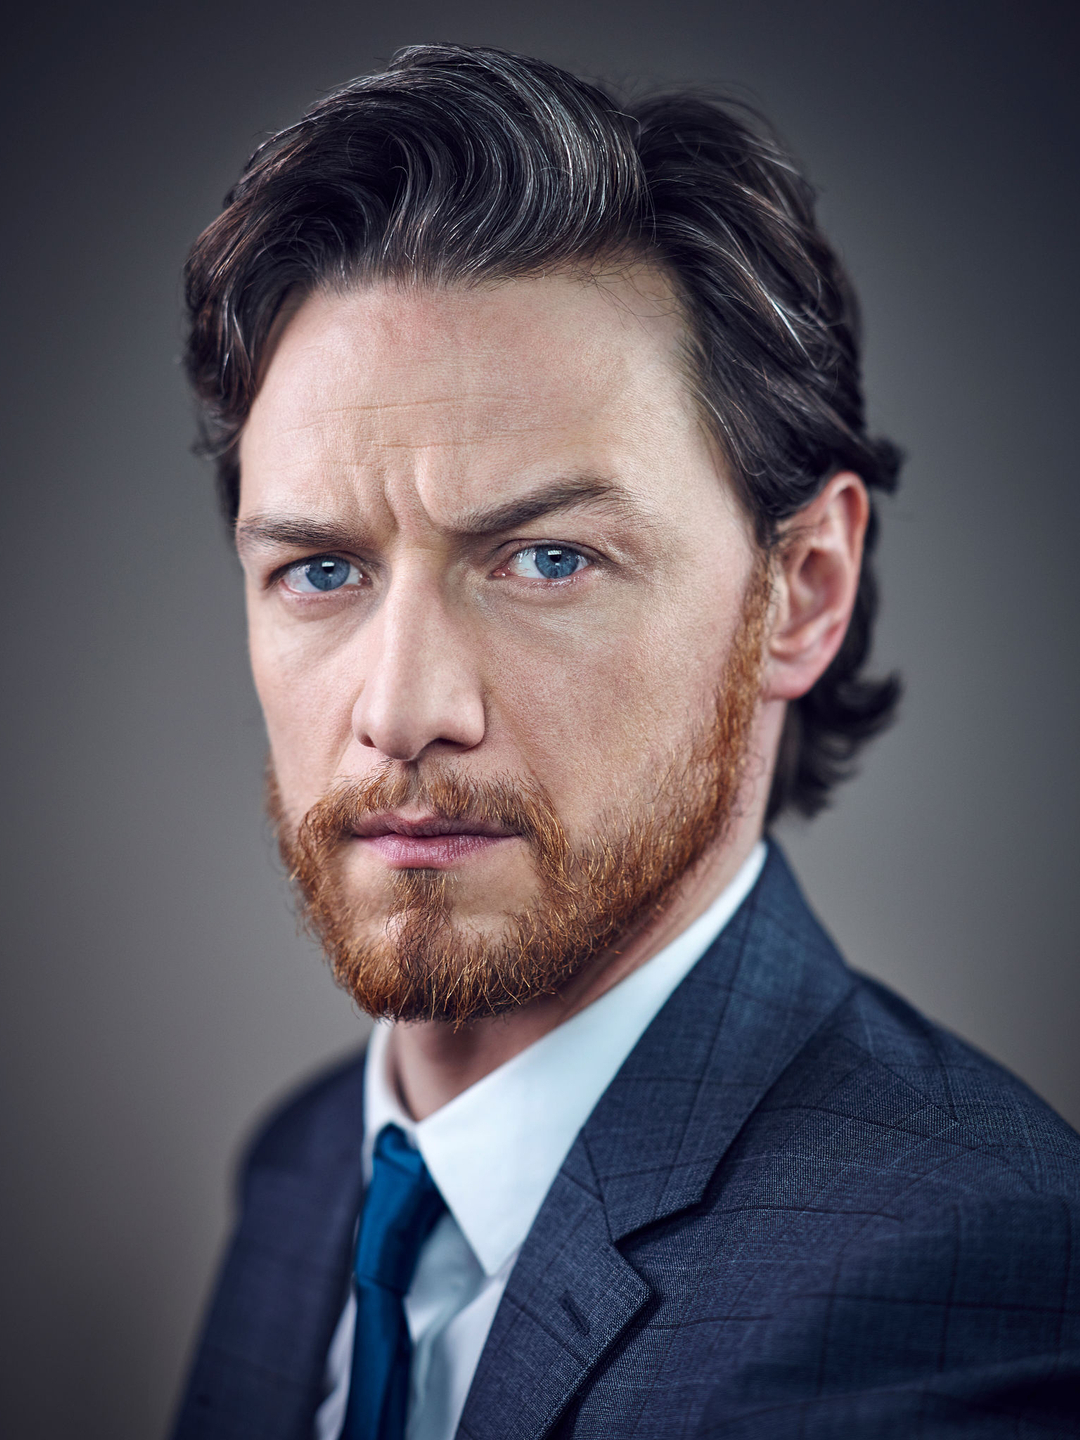 James McAvoy early life